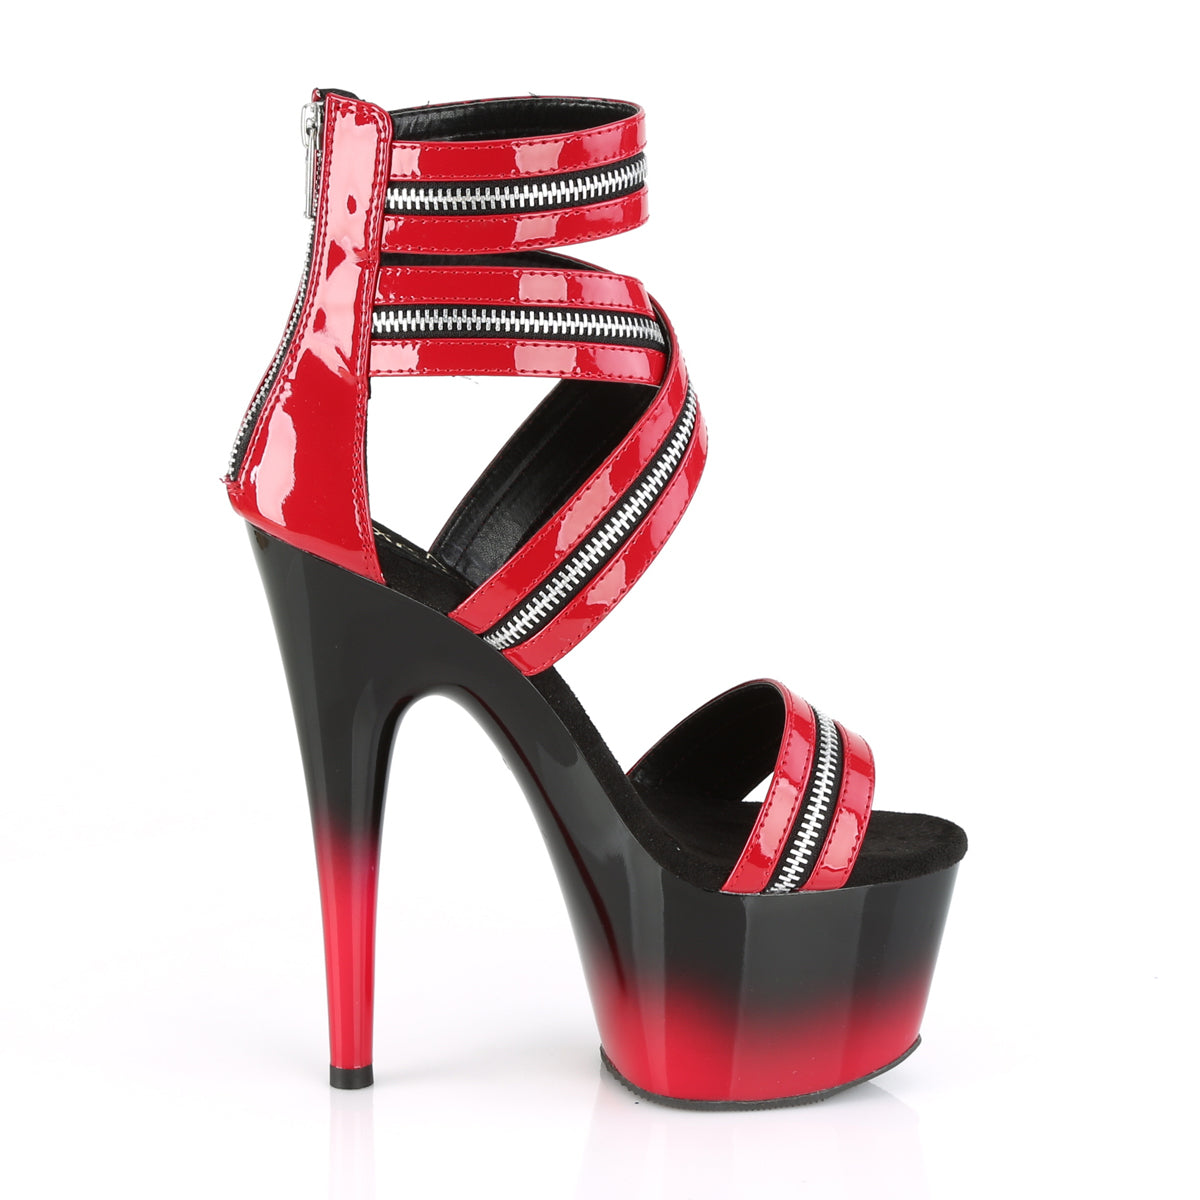 ADORE-766 Pleaser 7 Inch Heel Red Strippers Sandals-Pleaser- Sexy Shoes Fetish Heels